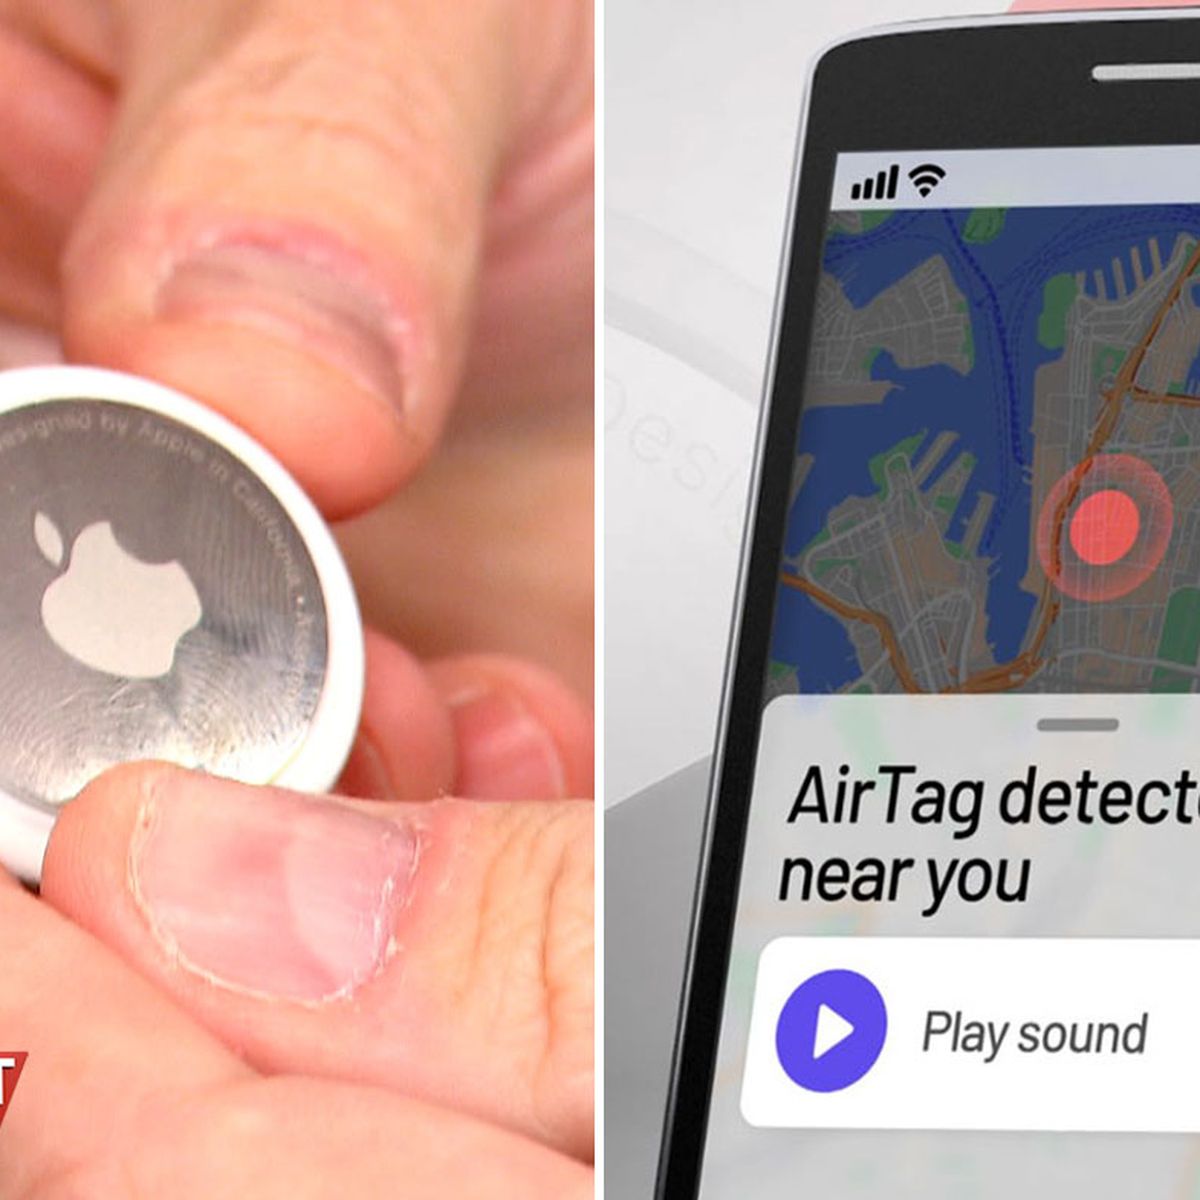 Australian travelers warn about Apple AirTag tracker placed in